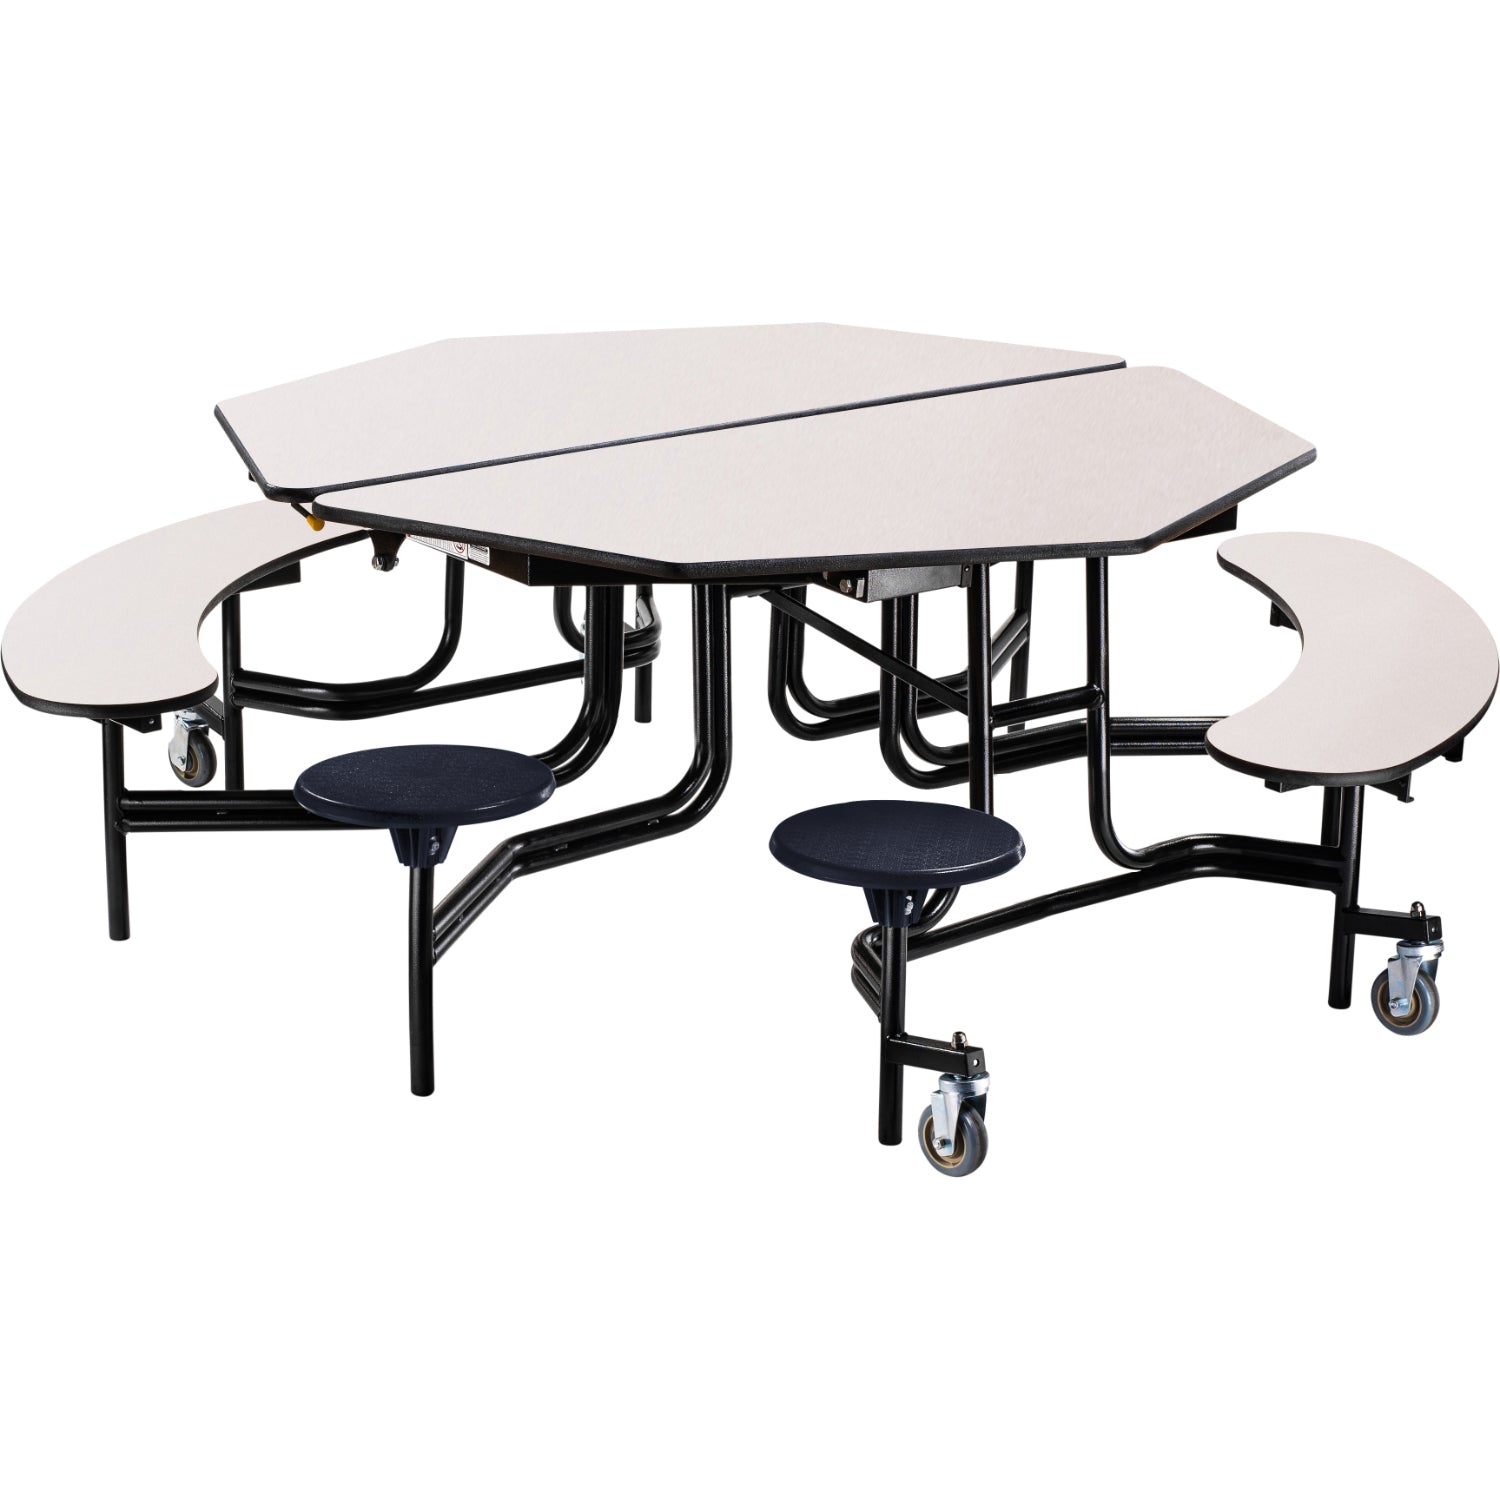 Mobile Combo Cafeteria Table, 60" Octagon with Stools and Benches, MDF Core, Black ProtectEdge, Textured Black Frame